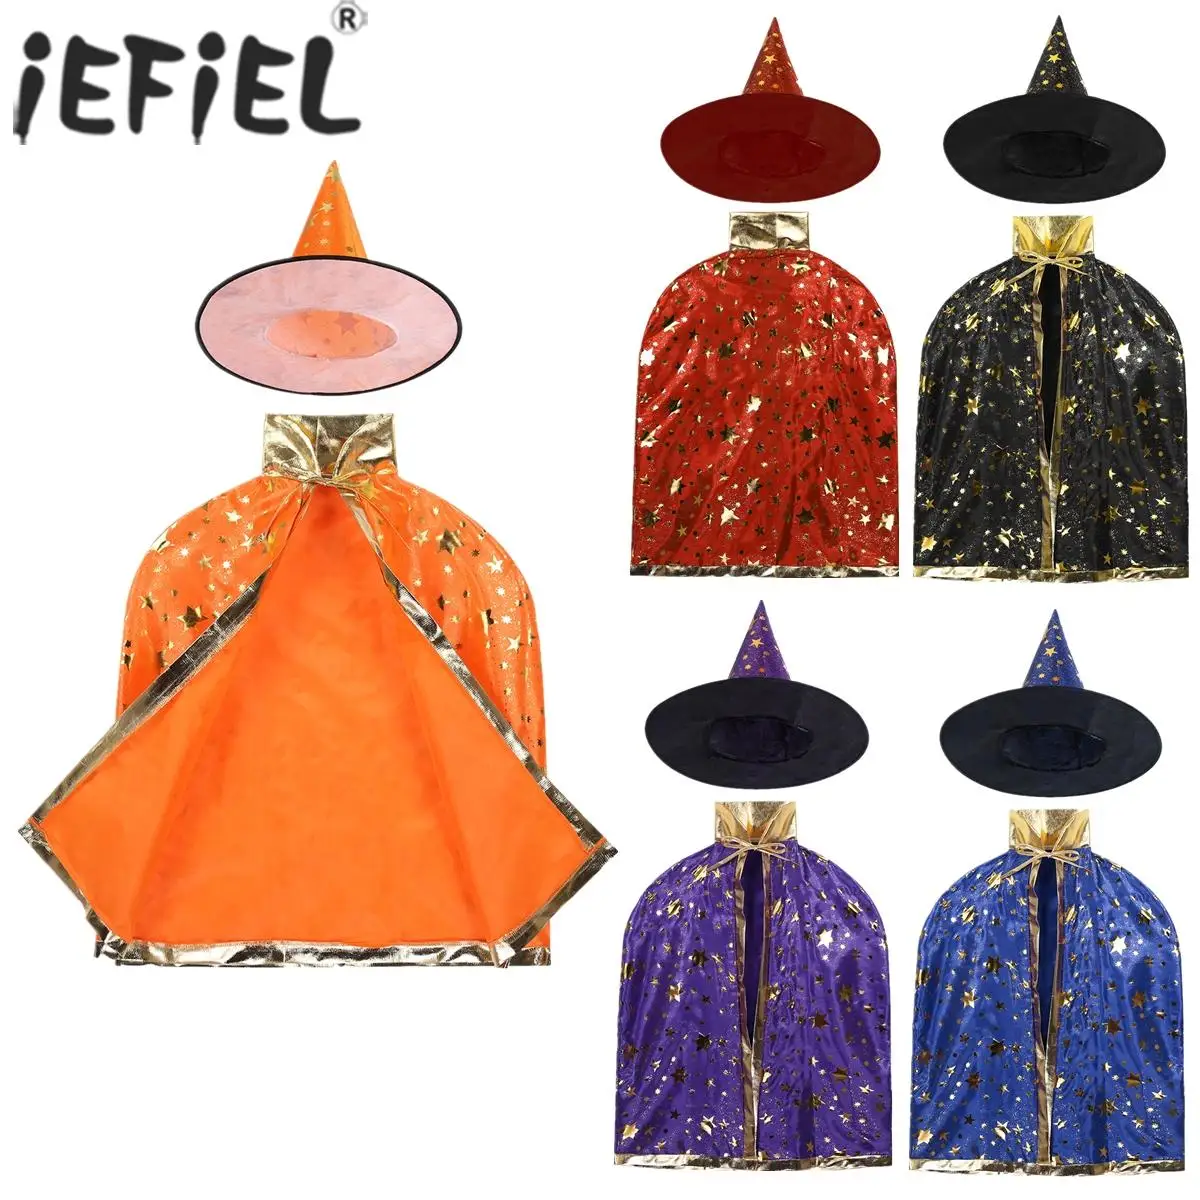 

Kids Halloween Cosplay Costume Witch Wizard Cloak Cape with Pointed Hat Carnival Theme Party Magician Role Play Dress Up Outfits